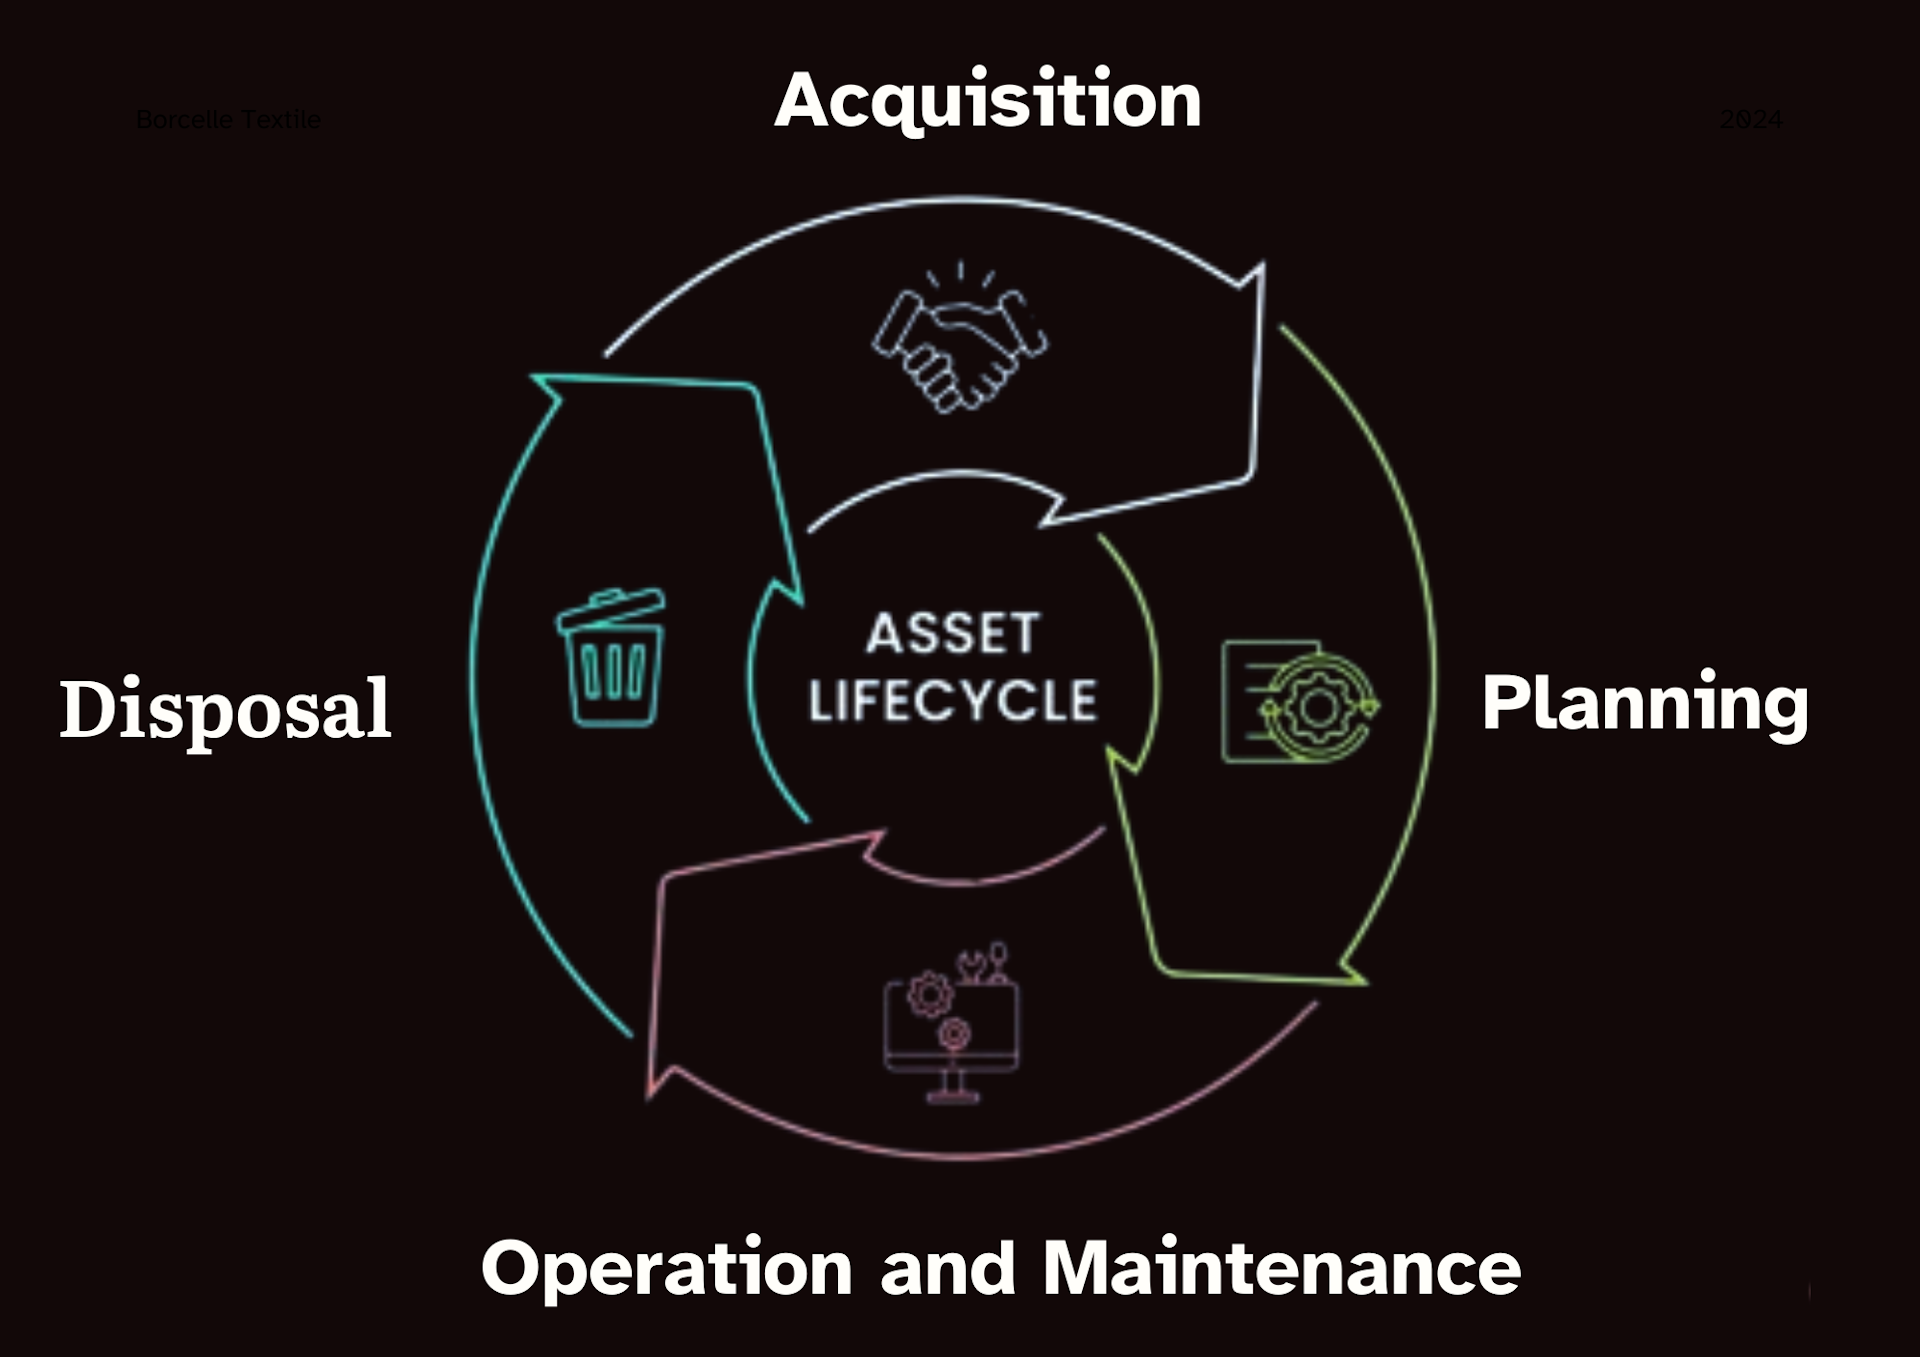  Asset Lifecycle Management